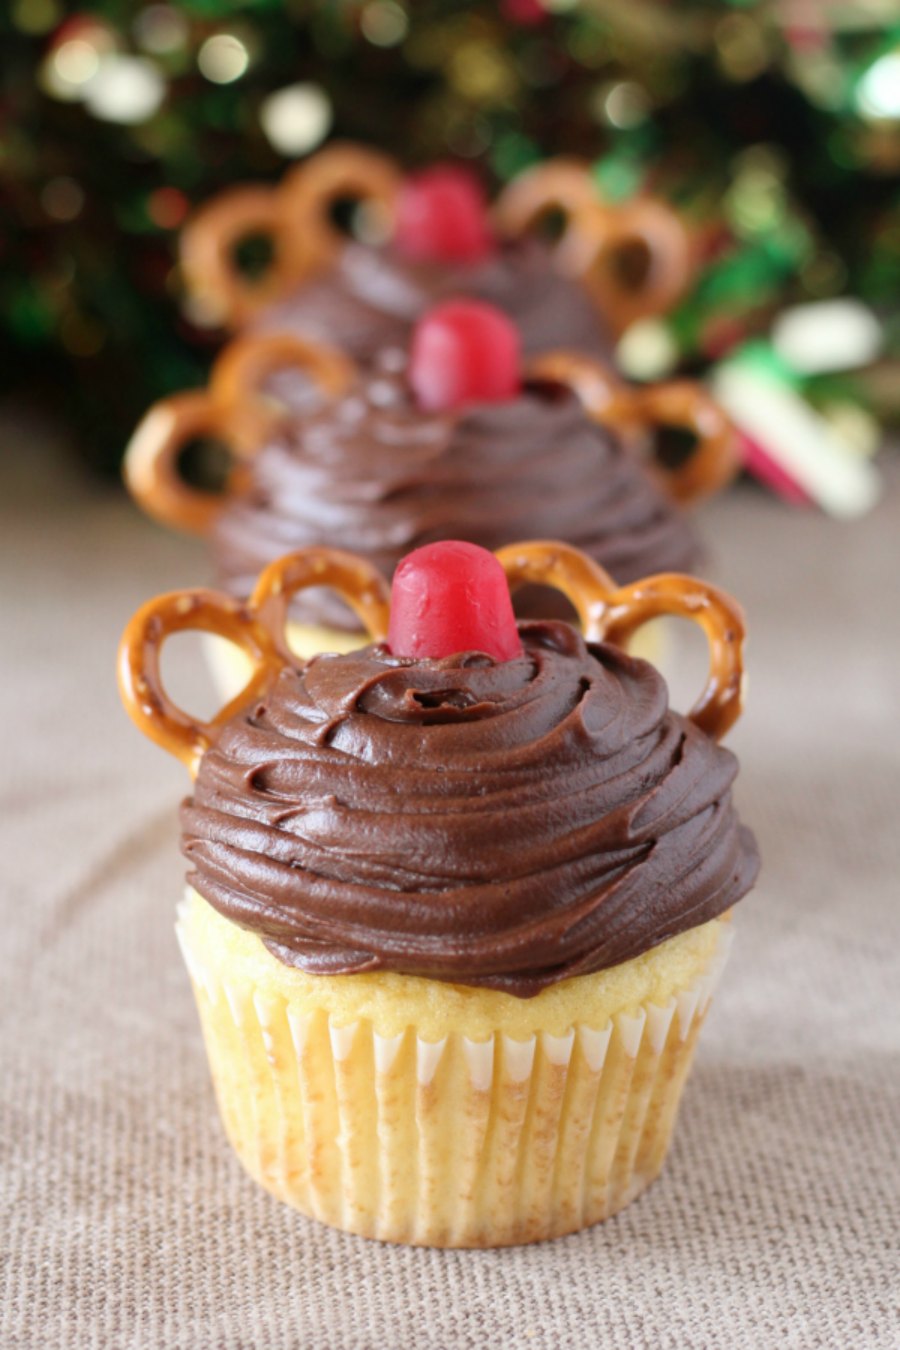 Super cute and easy to make, these Rudolph cupcakes are sure to make your day more festive! They are easy enough for the kids to hep make them and perfect for Christmas classroom parties as well.